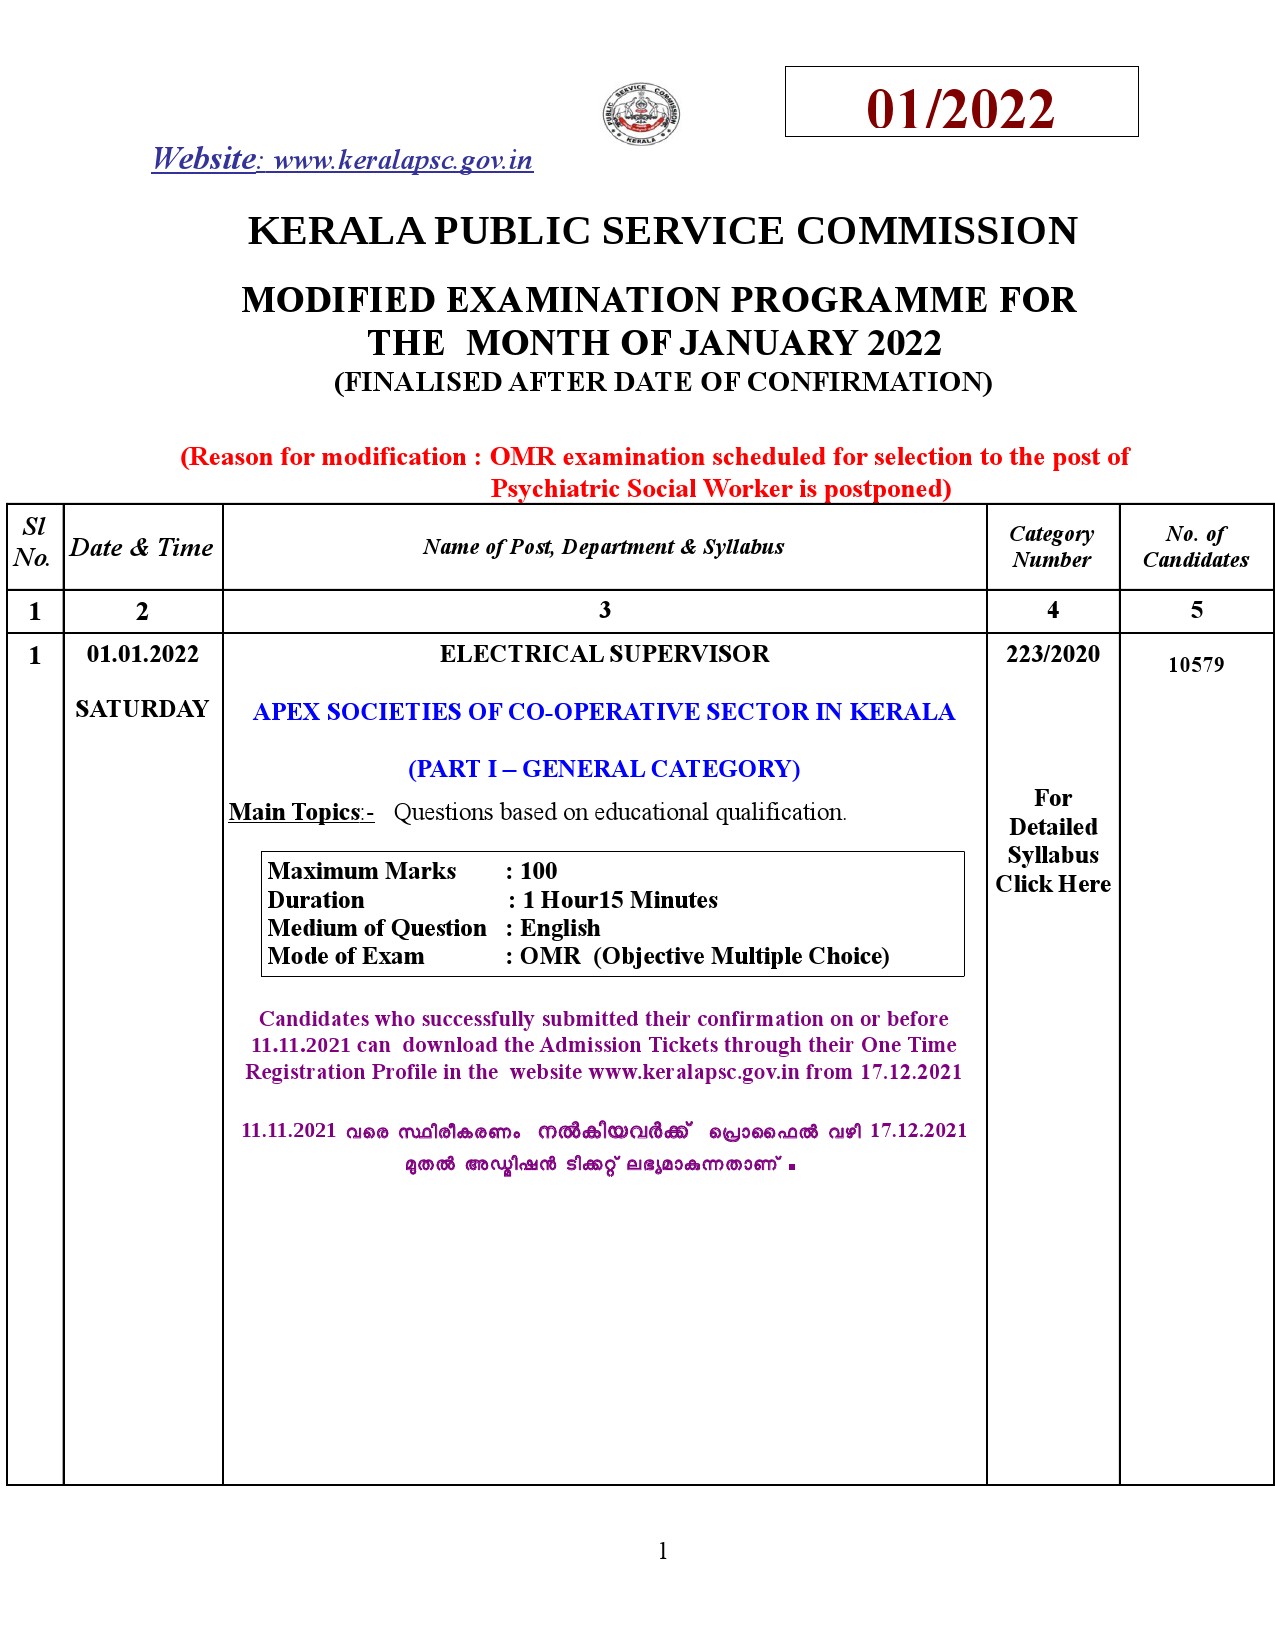 KPSC MODIFIED EXAMINATION PROGRAMME FOR THE MONTH OF JANUARY 2022 - Notification Image 1